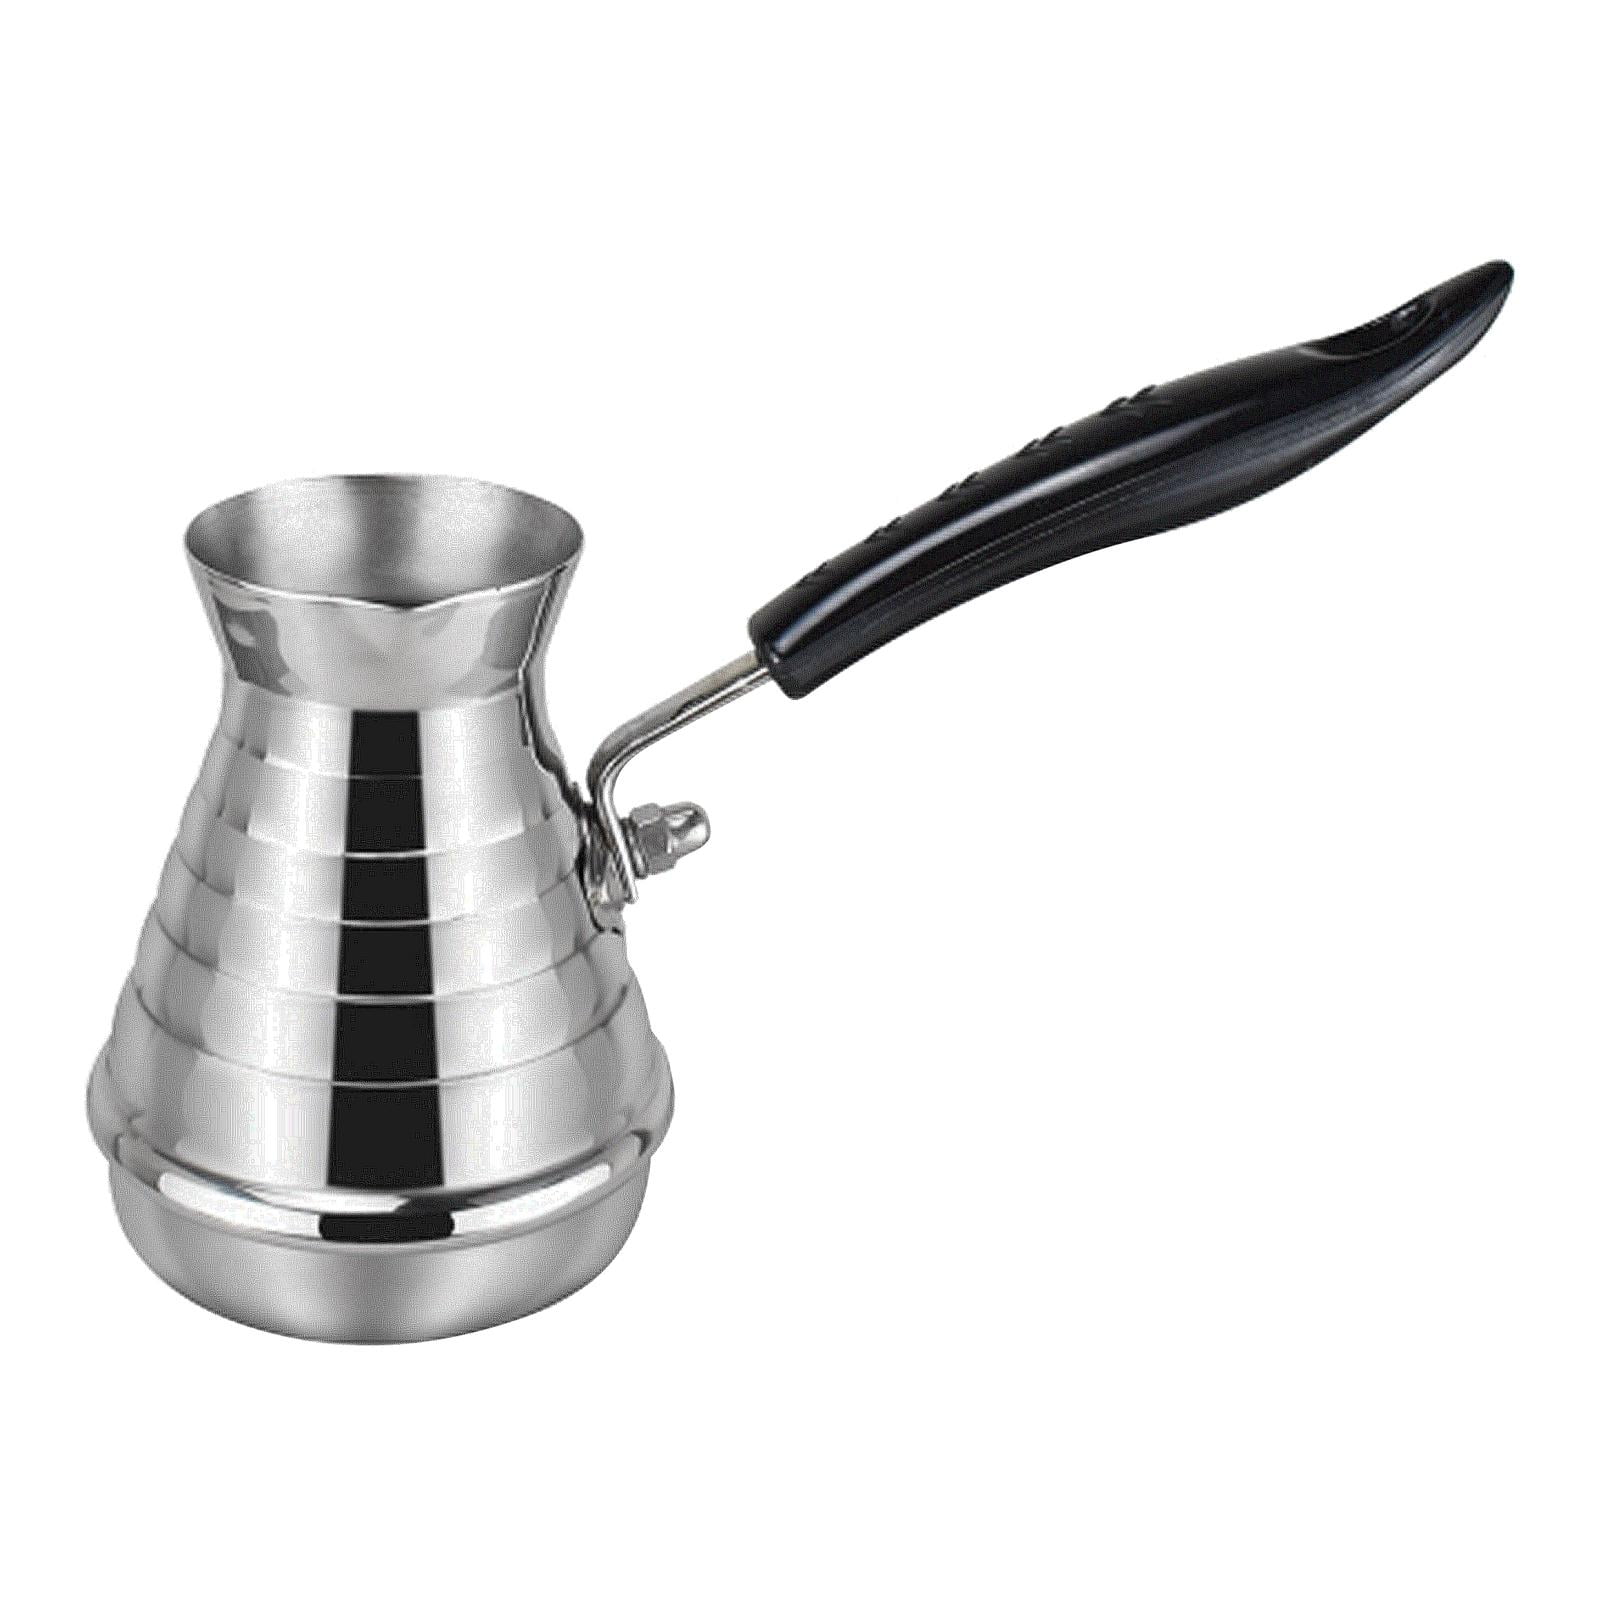 Turkish Coffee Pot Stainless Steel Exquisite Craft Non-toxic Handle Milk  Long Cup Wax Melting